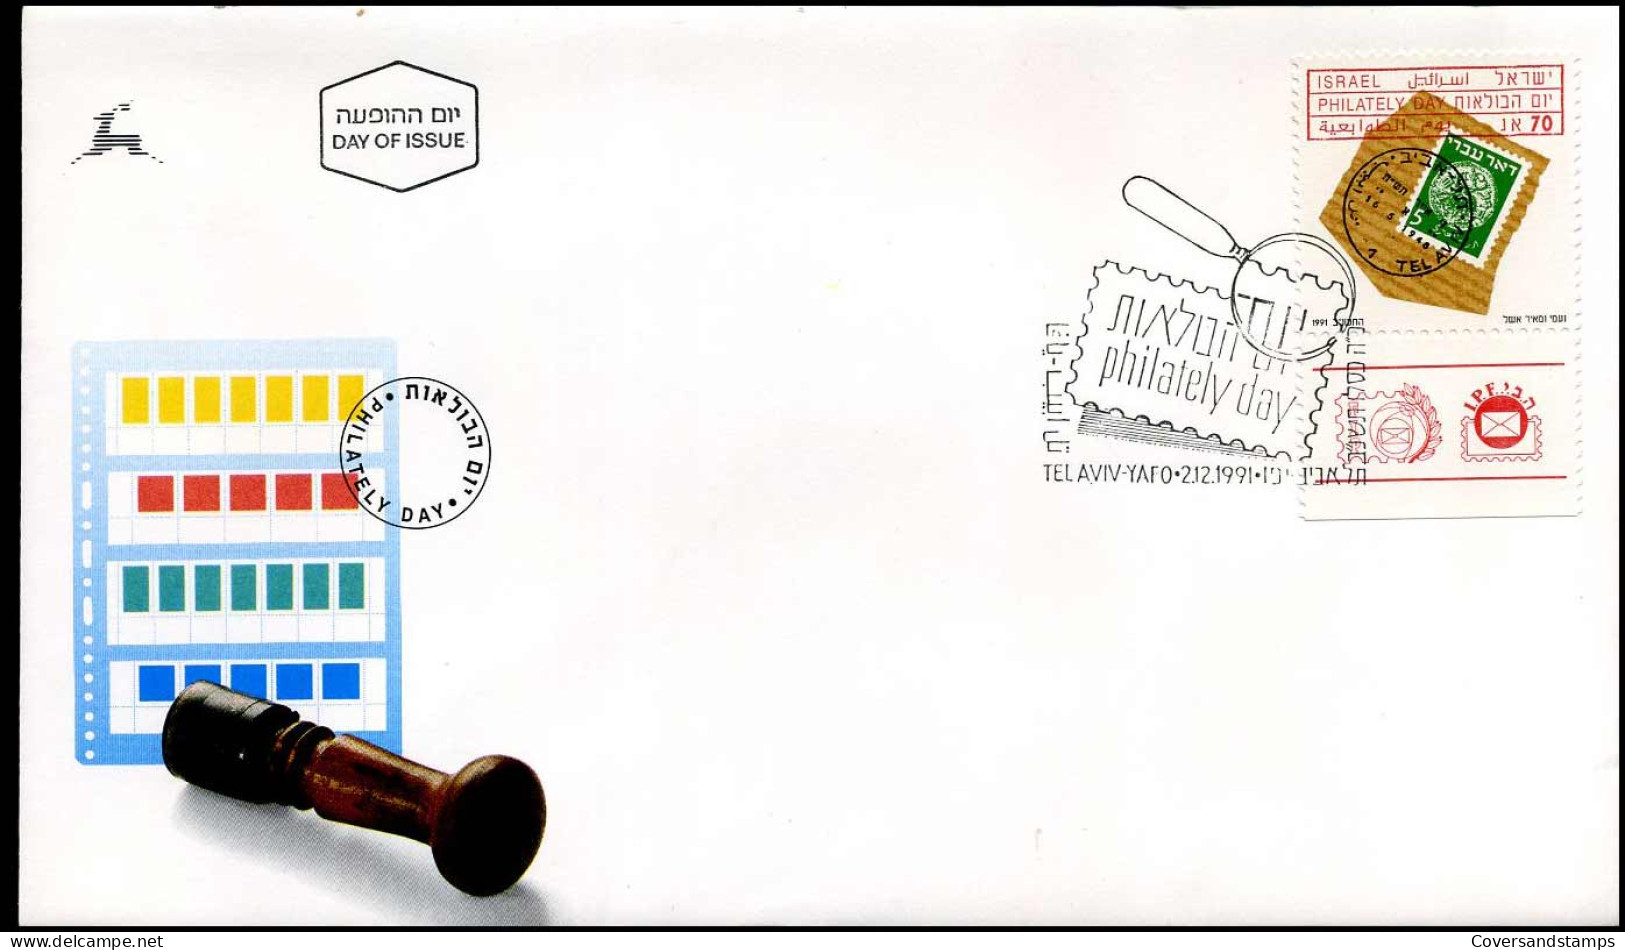 FDC - Philately Day - FDC